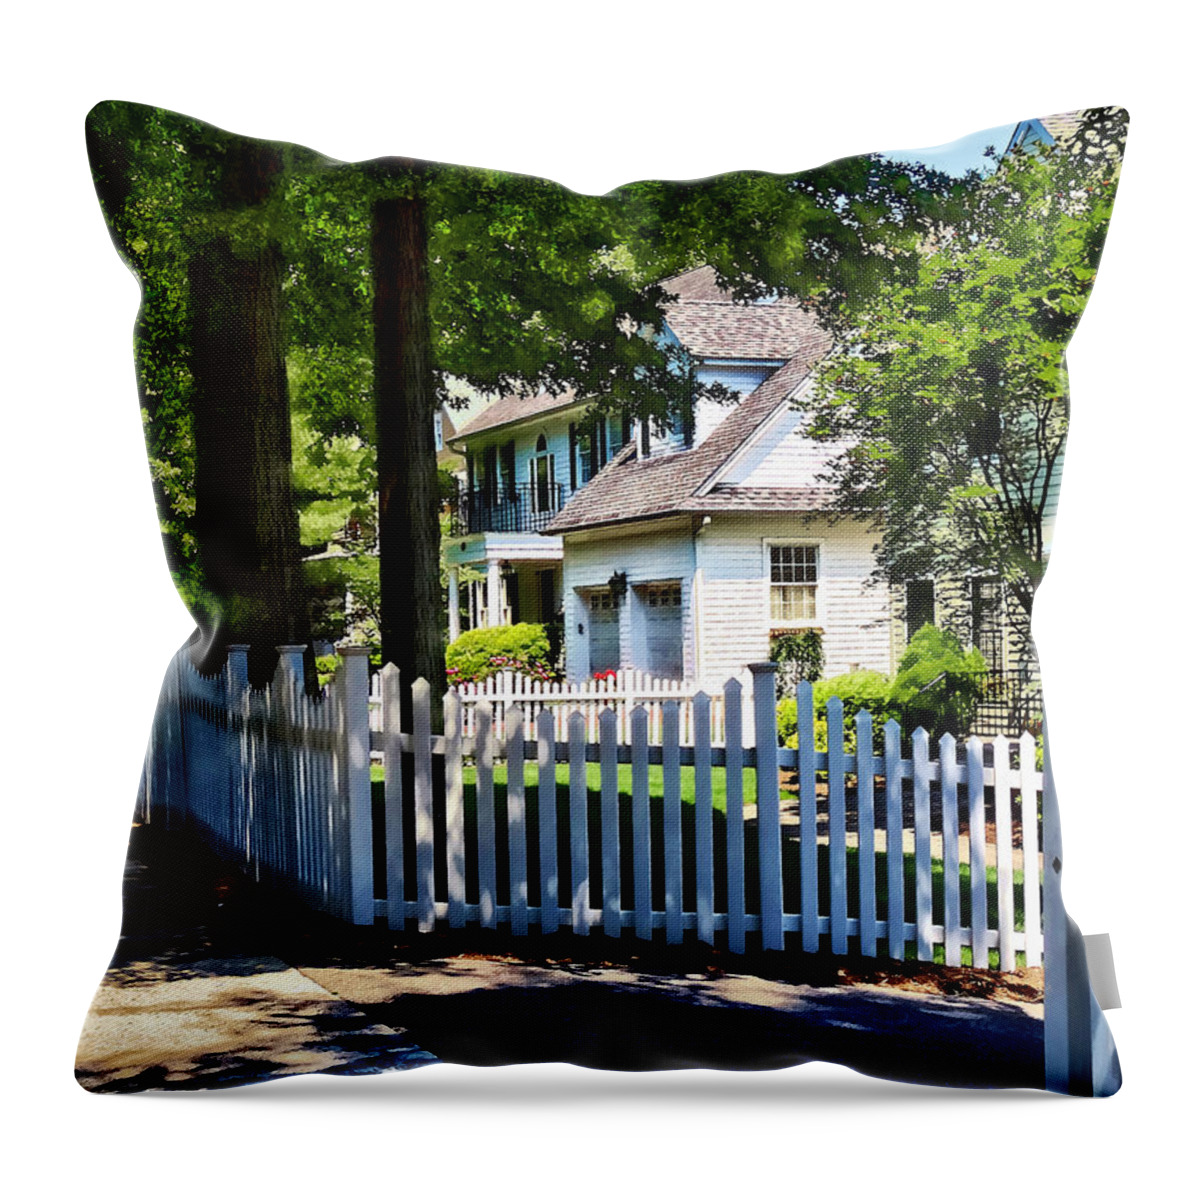 Fence Throw Pillow featuring the photograph White Picket Fence by Susan Savad